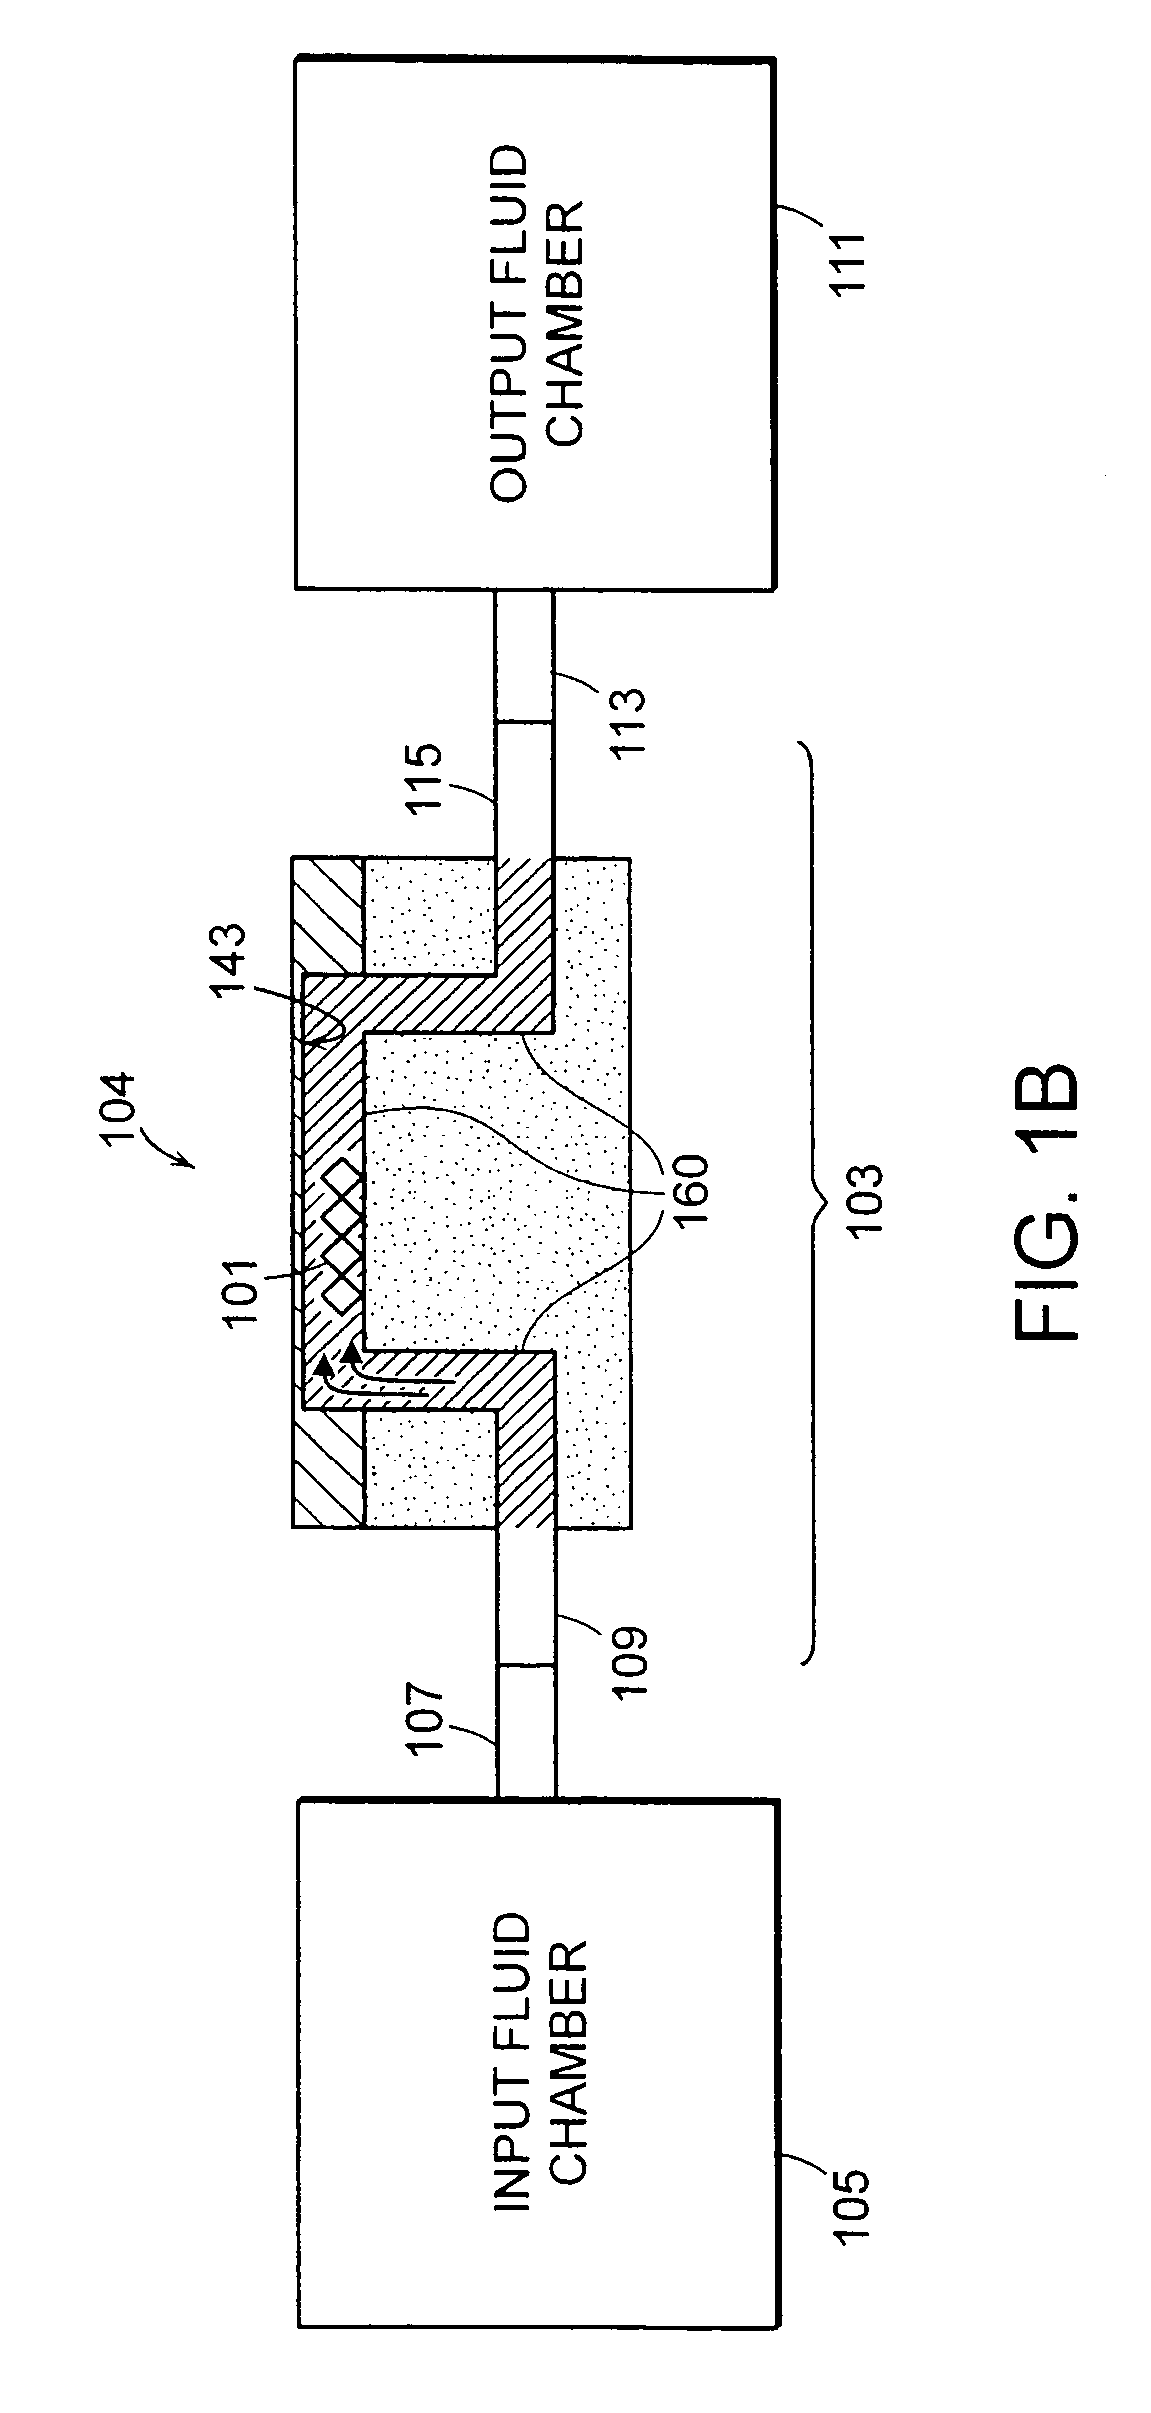 Method and apparatus for analyzing bioprocess fluids